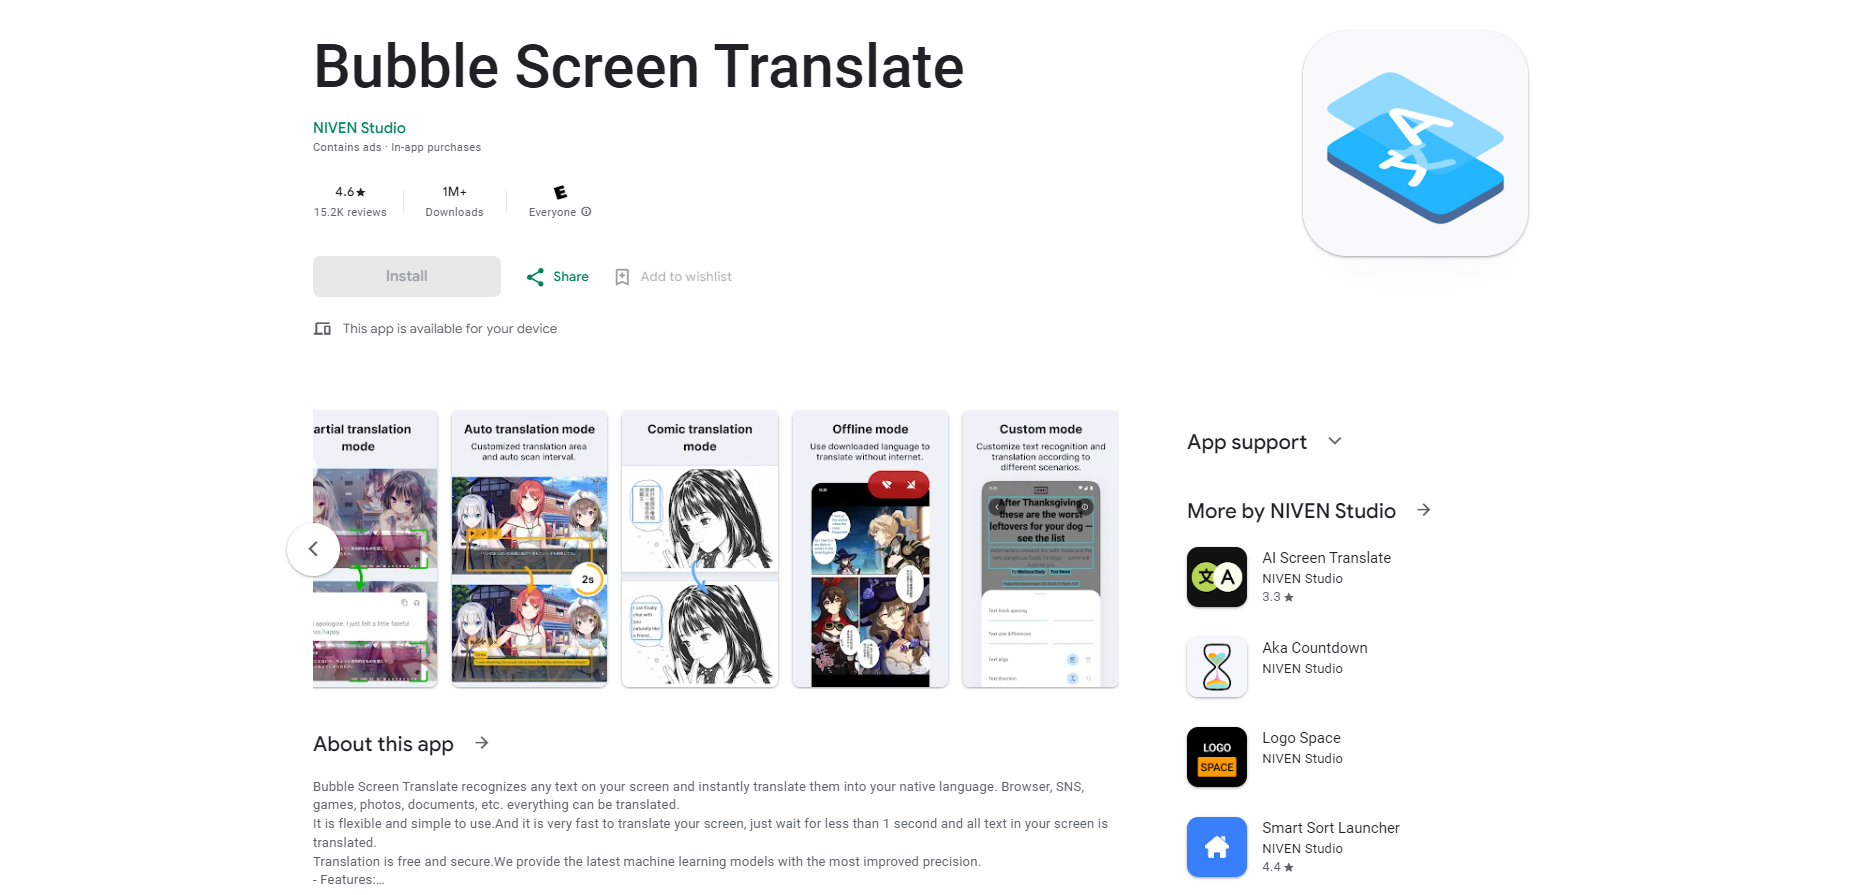 Bubble Screen Translateon: Instantly translate text on your screen. Download now from the Play Store